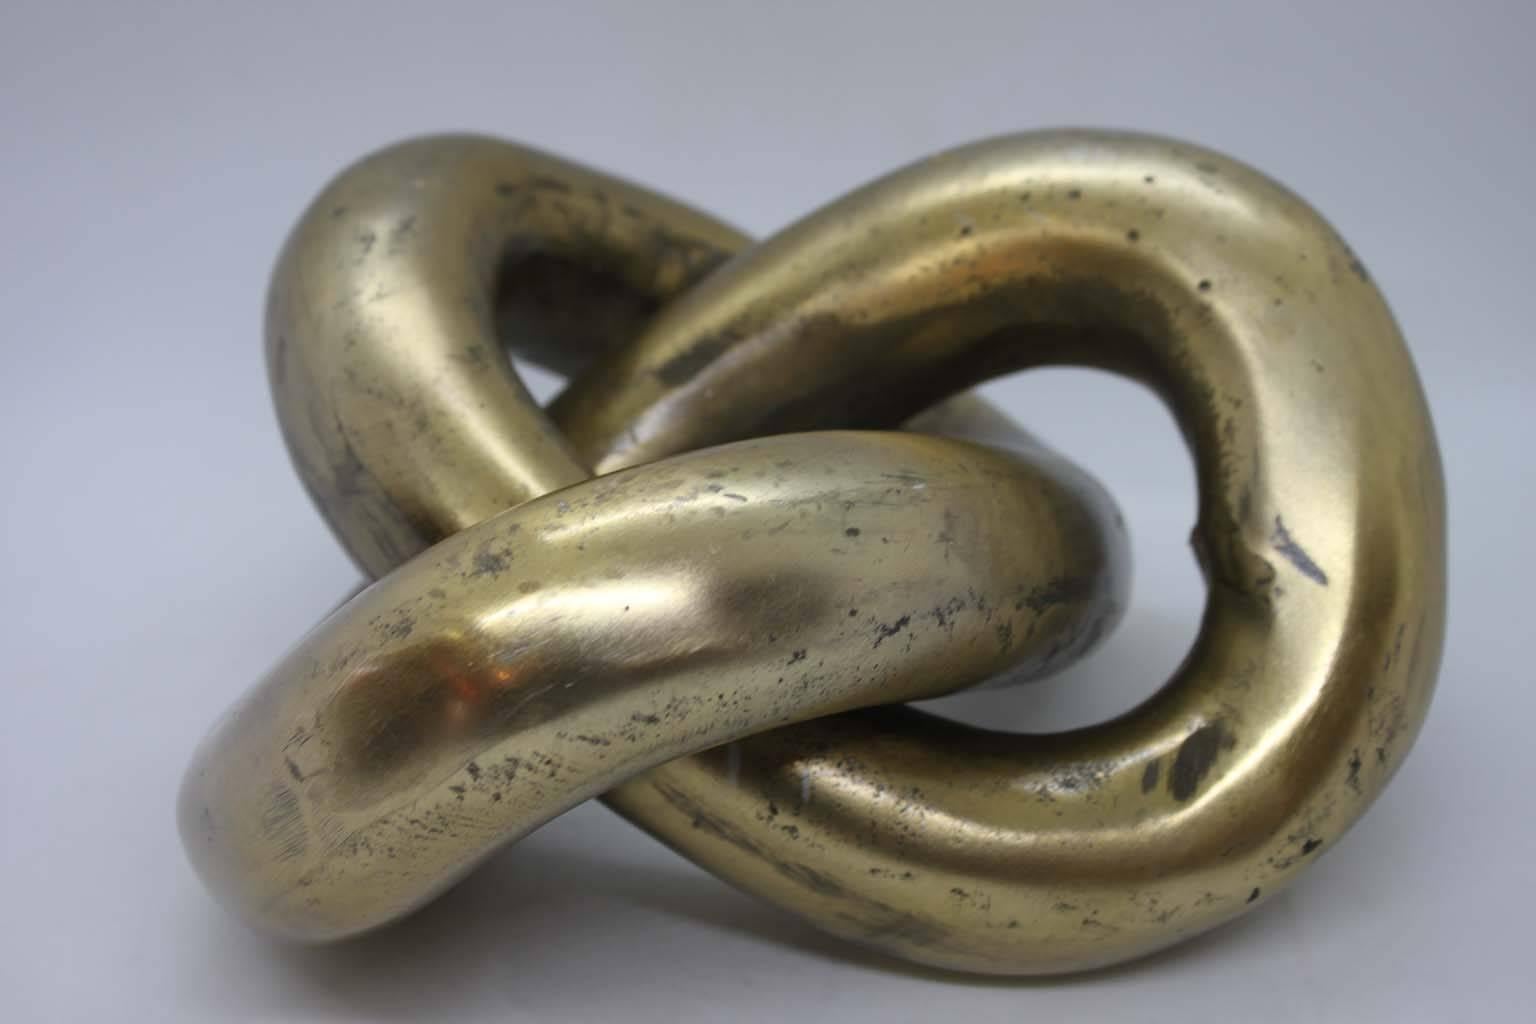 Silvered paperweight sculpture in the style of Carl Auböck. It forms an interlaced chain made in heavy aluminium. Very good condition.
Dimensions: Height 12cm, depth 21cm, width 21cm.